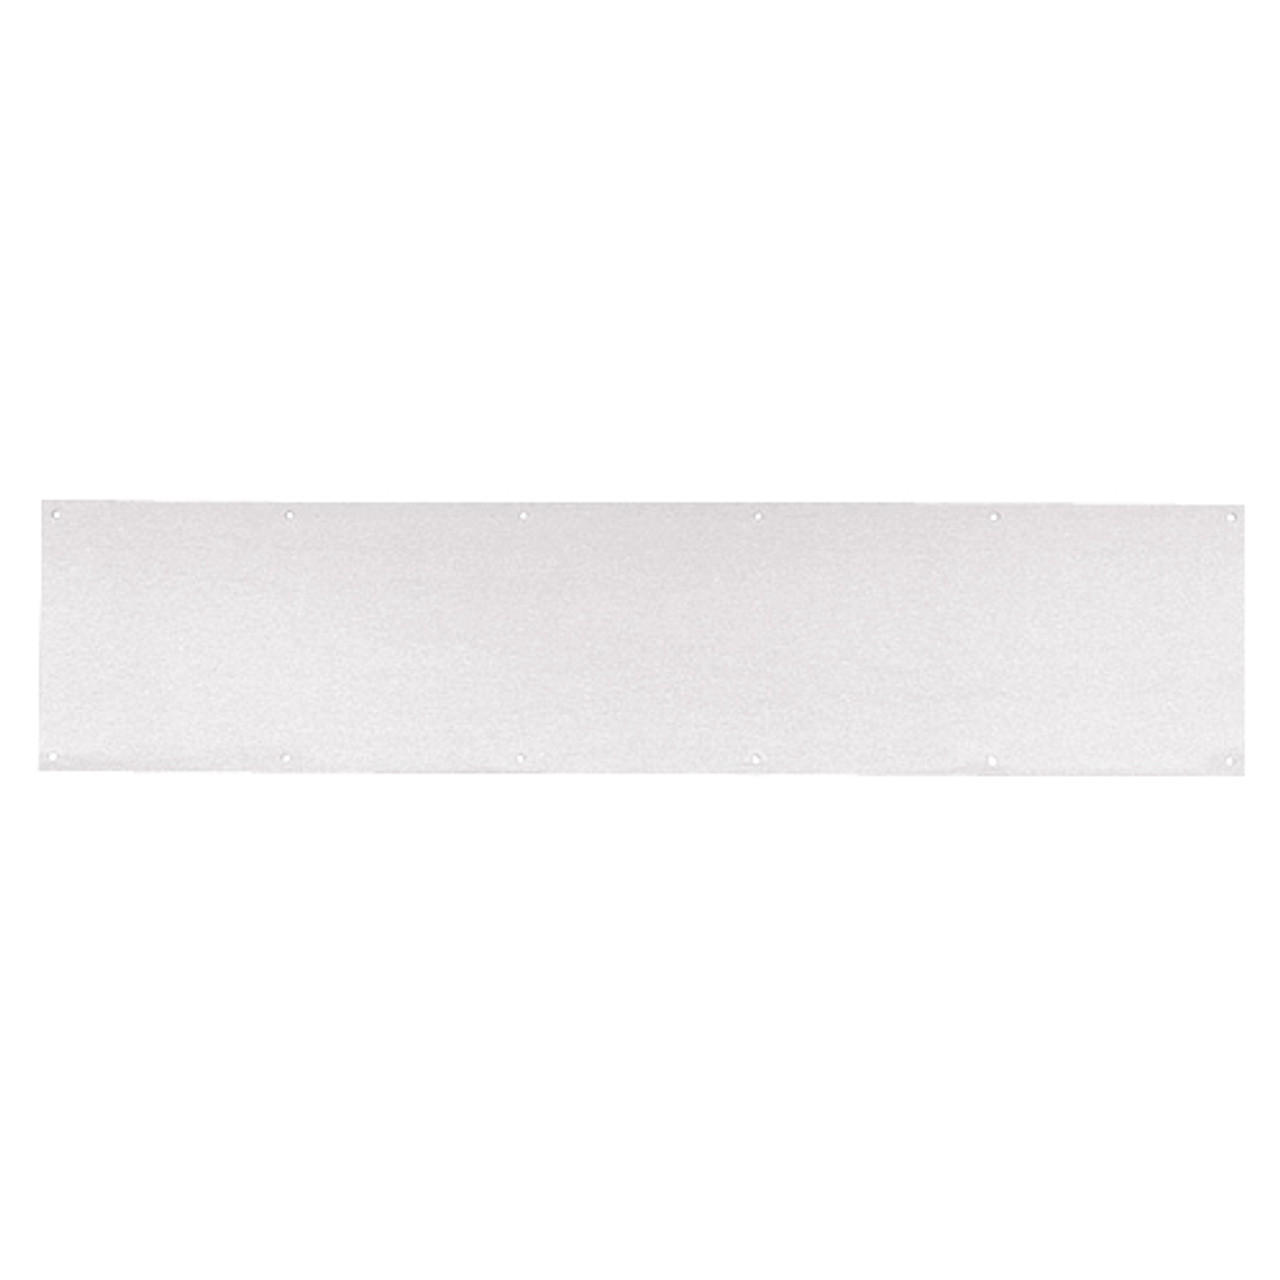 8400-US15-8x34-B-CS Ives 8400 Series Protection Plate in Satin Nickel